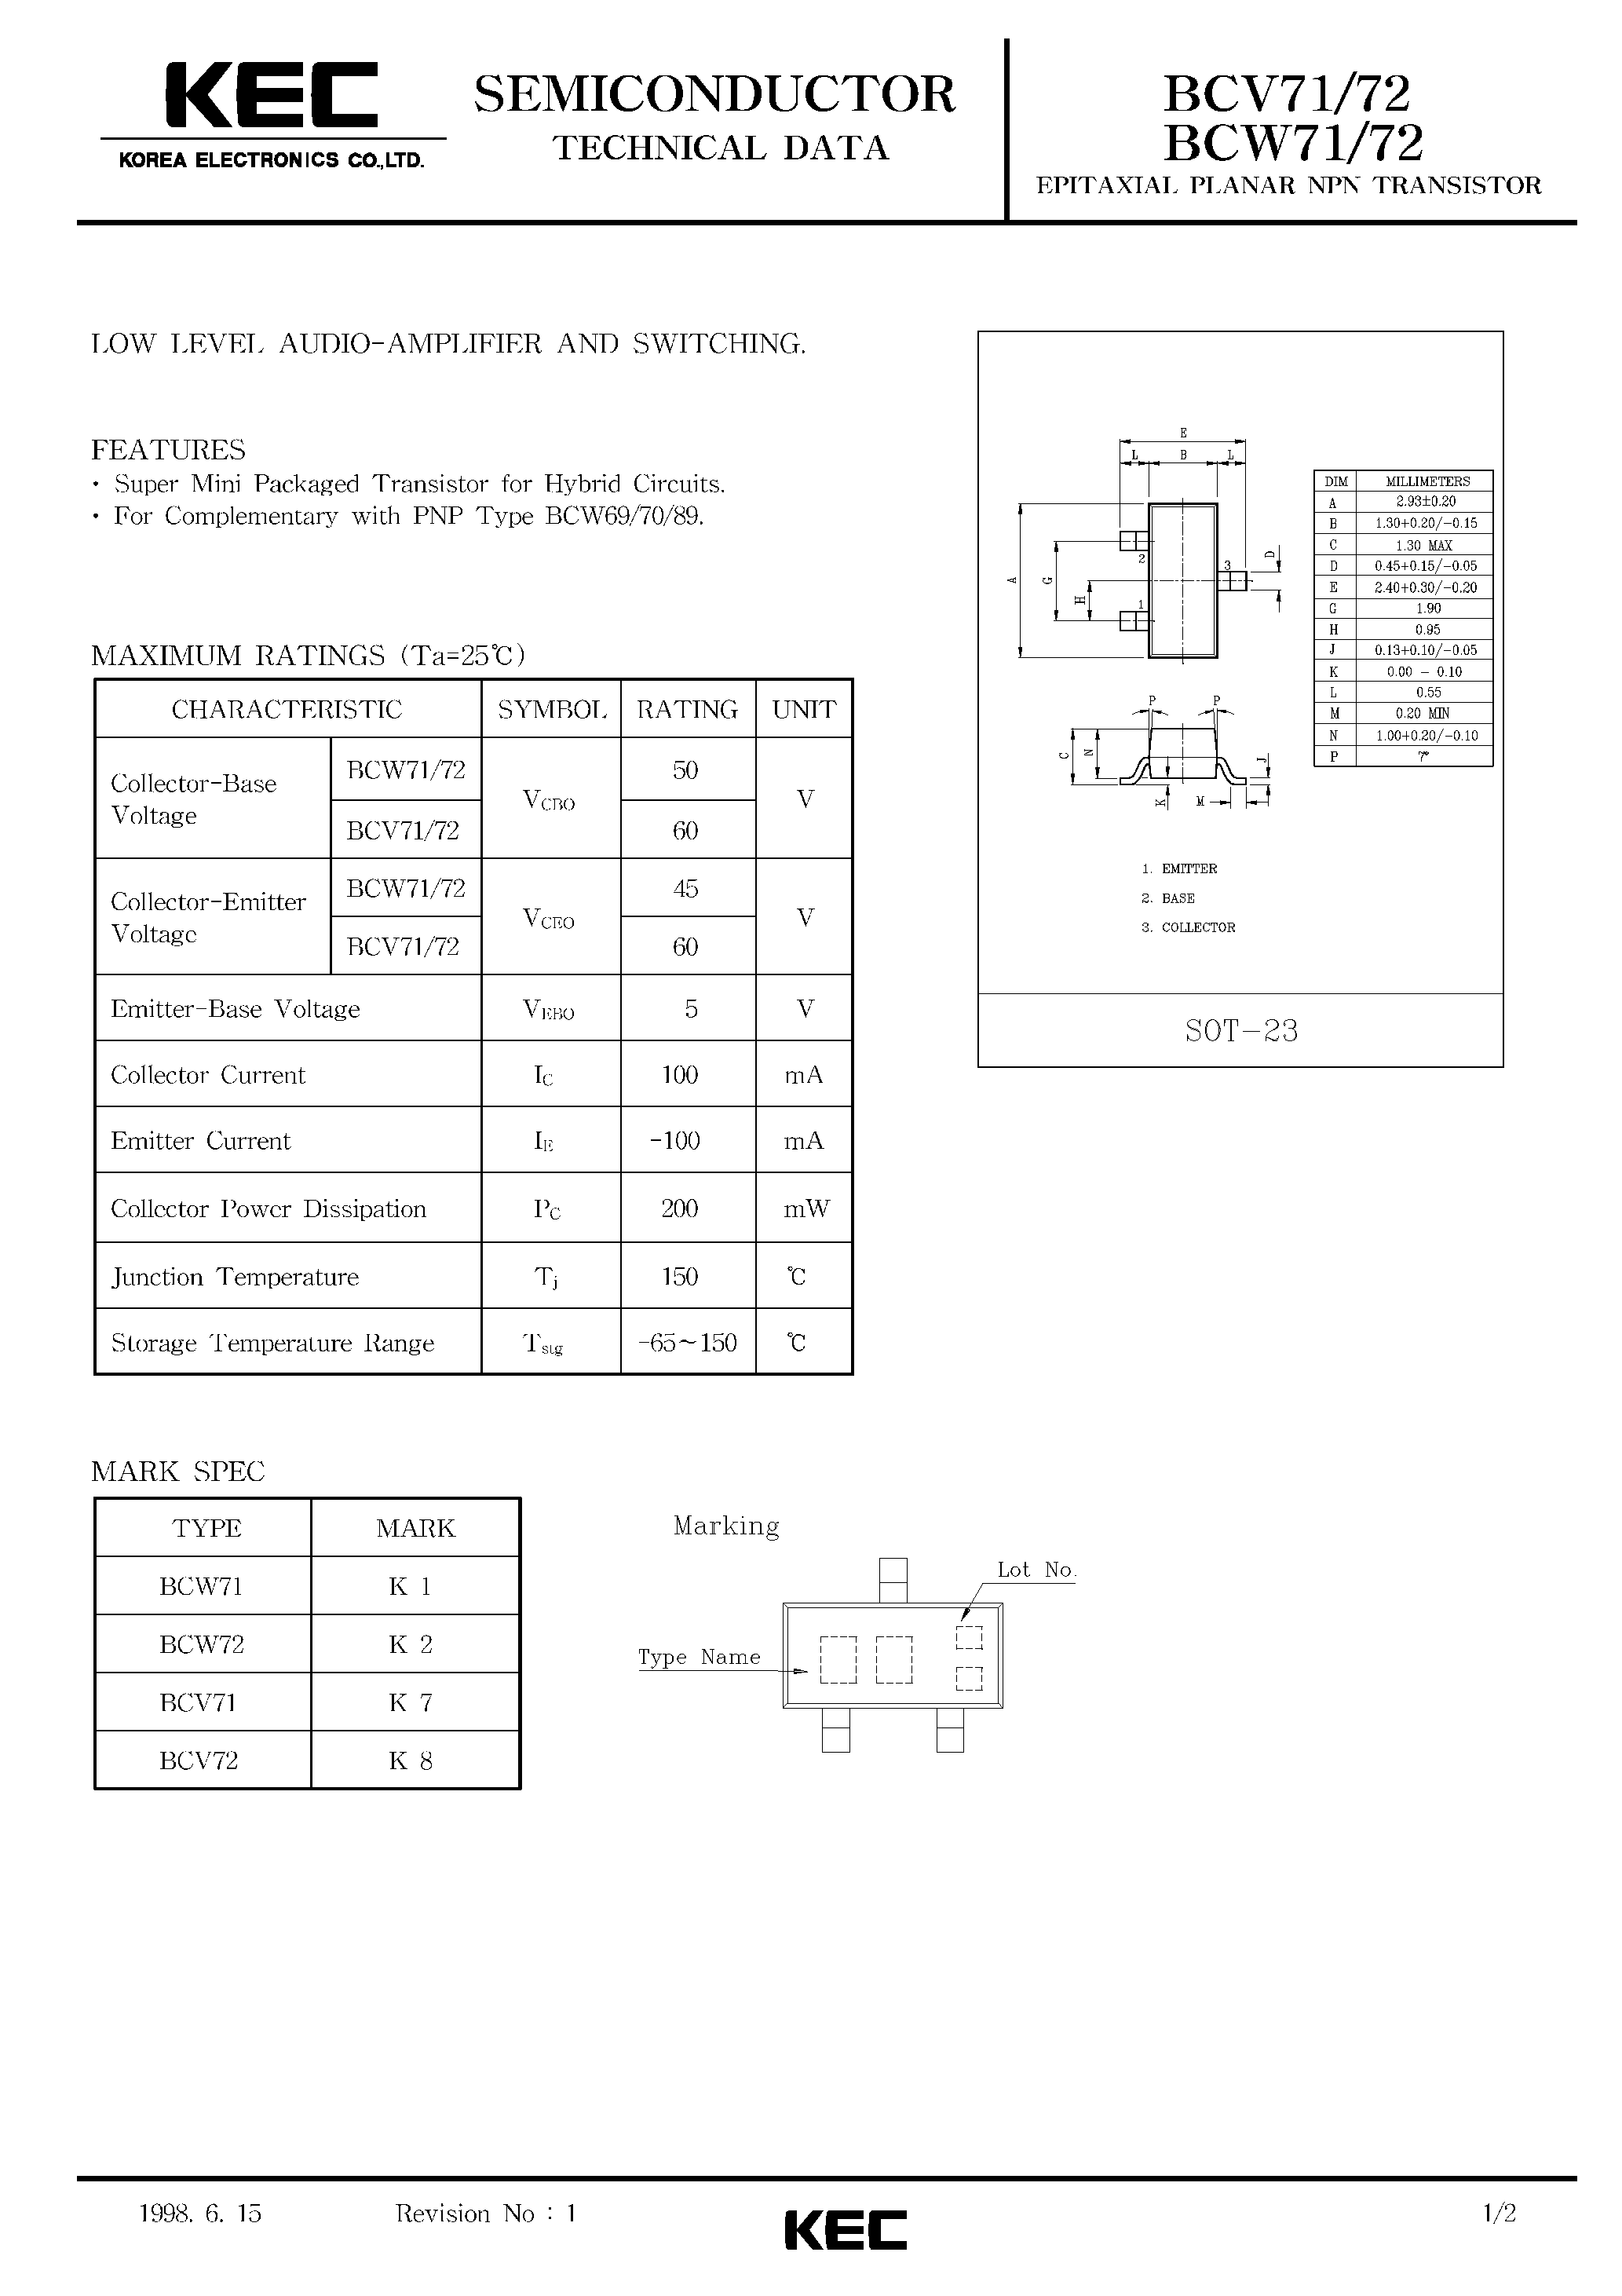 Datasheet BCW72 - EPITAXIAL PLANAR NPN TRANSISTOR (LOW LEVEL AUDIO-AMPLIFIER AND SWITCHING) page 1